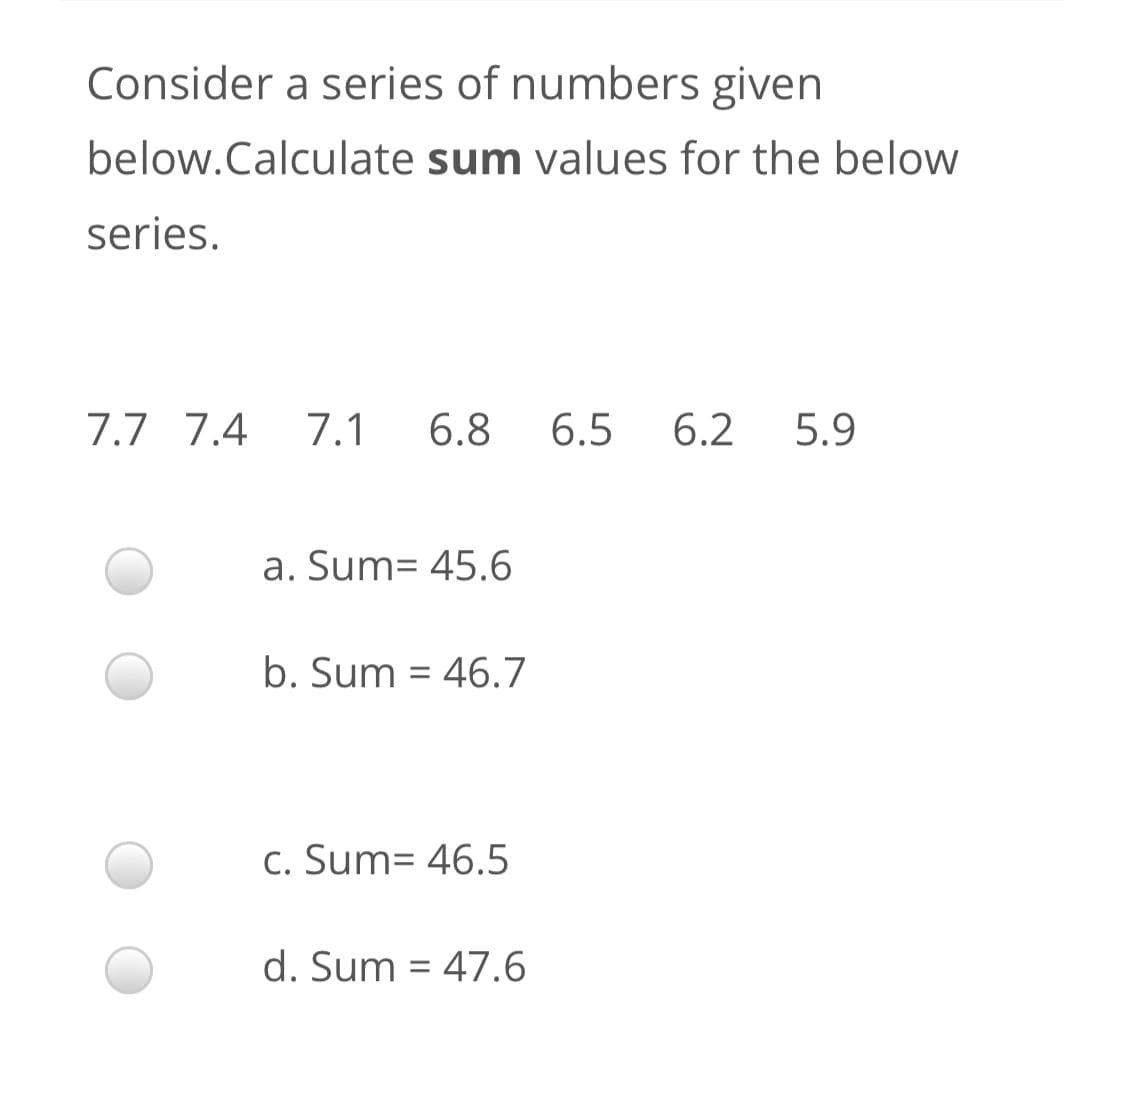 Consider a series of numbers given
below.Calculate sum values for the below
series.
7.7 7.4
7.1
6.8
6.5
6.2
5.9
a. Sum= 45.6
b. Sum = 46.7
c. Sum= 46.5
d. Sum = 47.6
